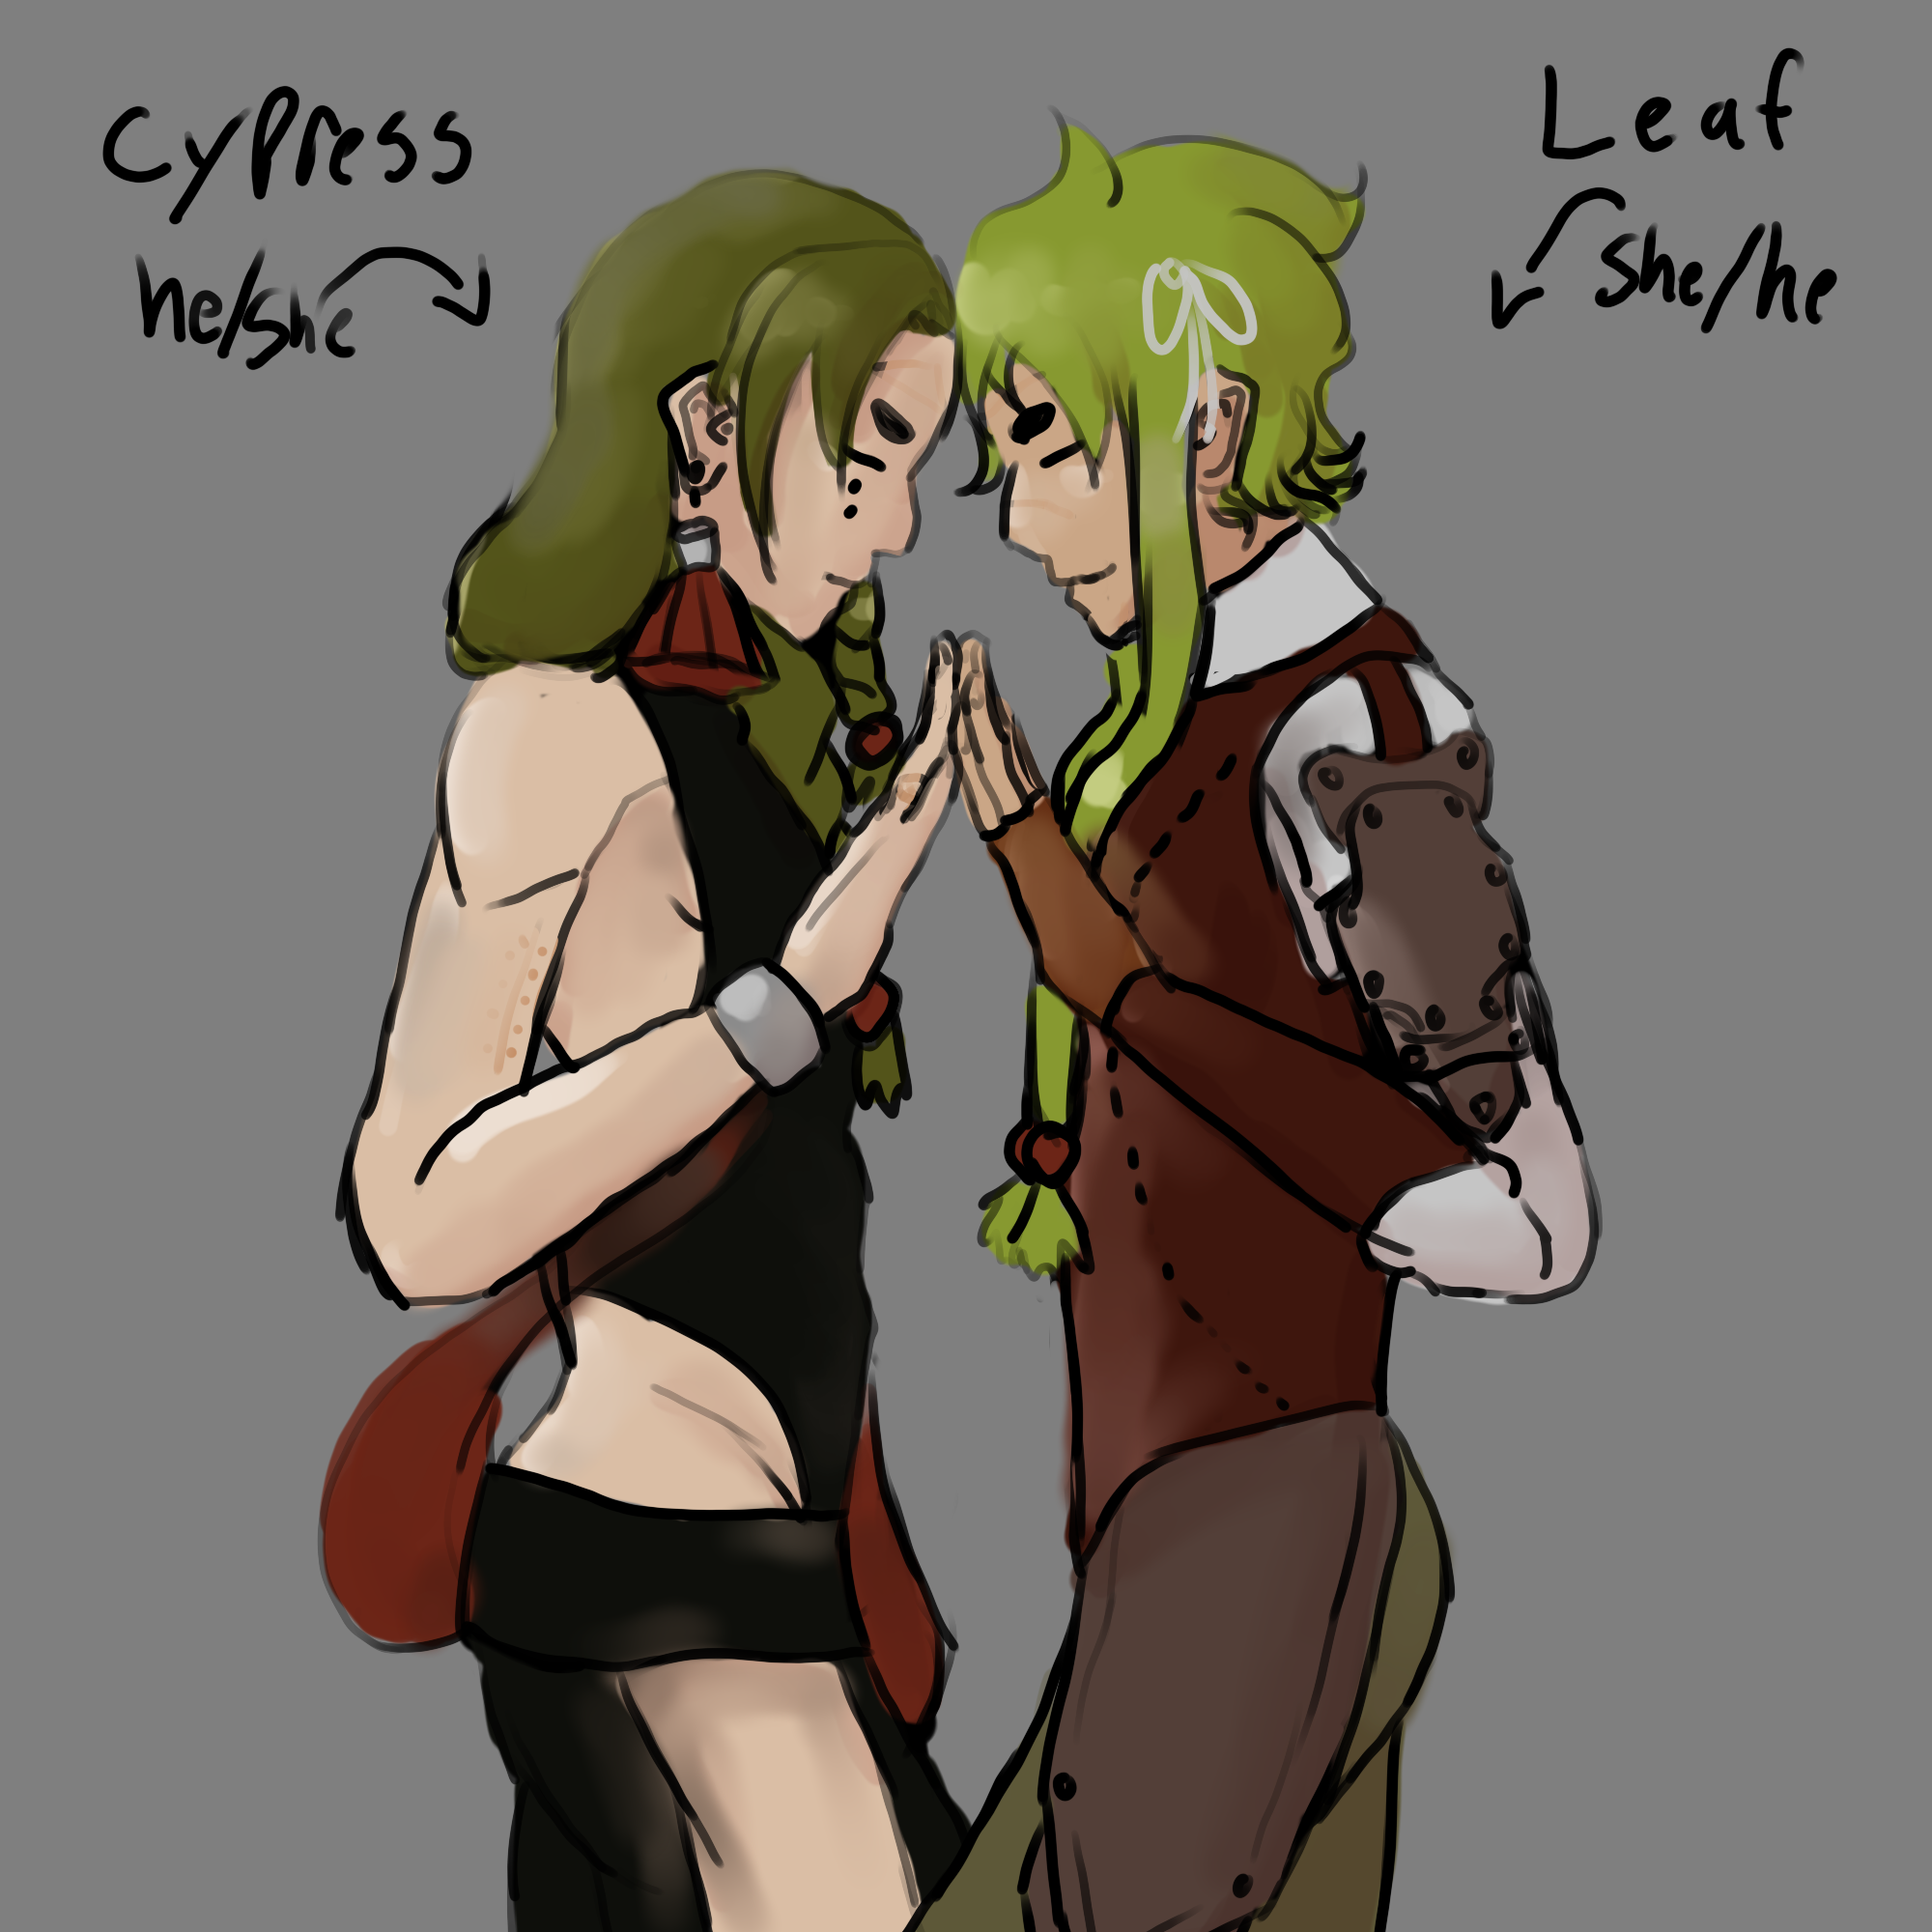 A drawing of my OCs Leaf and Cypress Ahlgren. They are facing eachother and touching their foreheads and hands together.